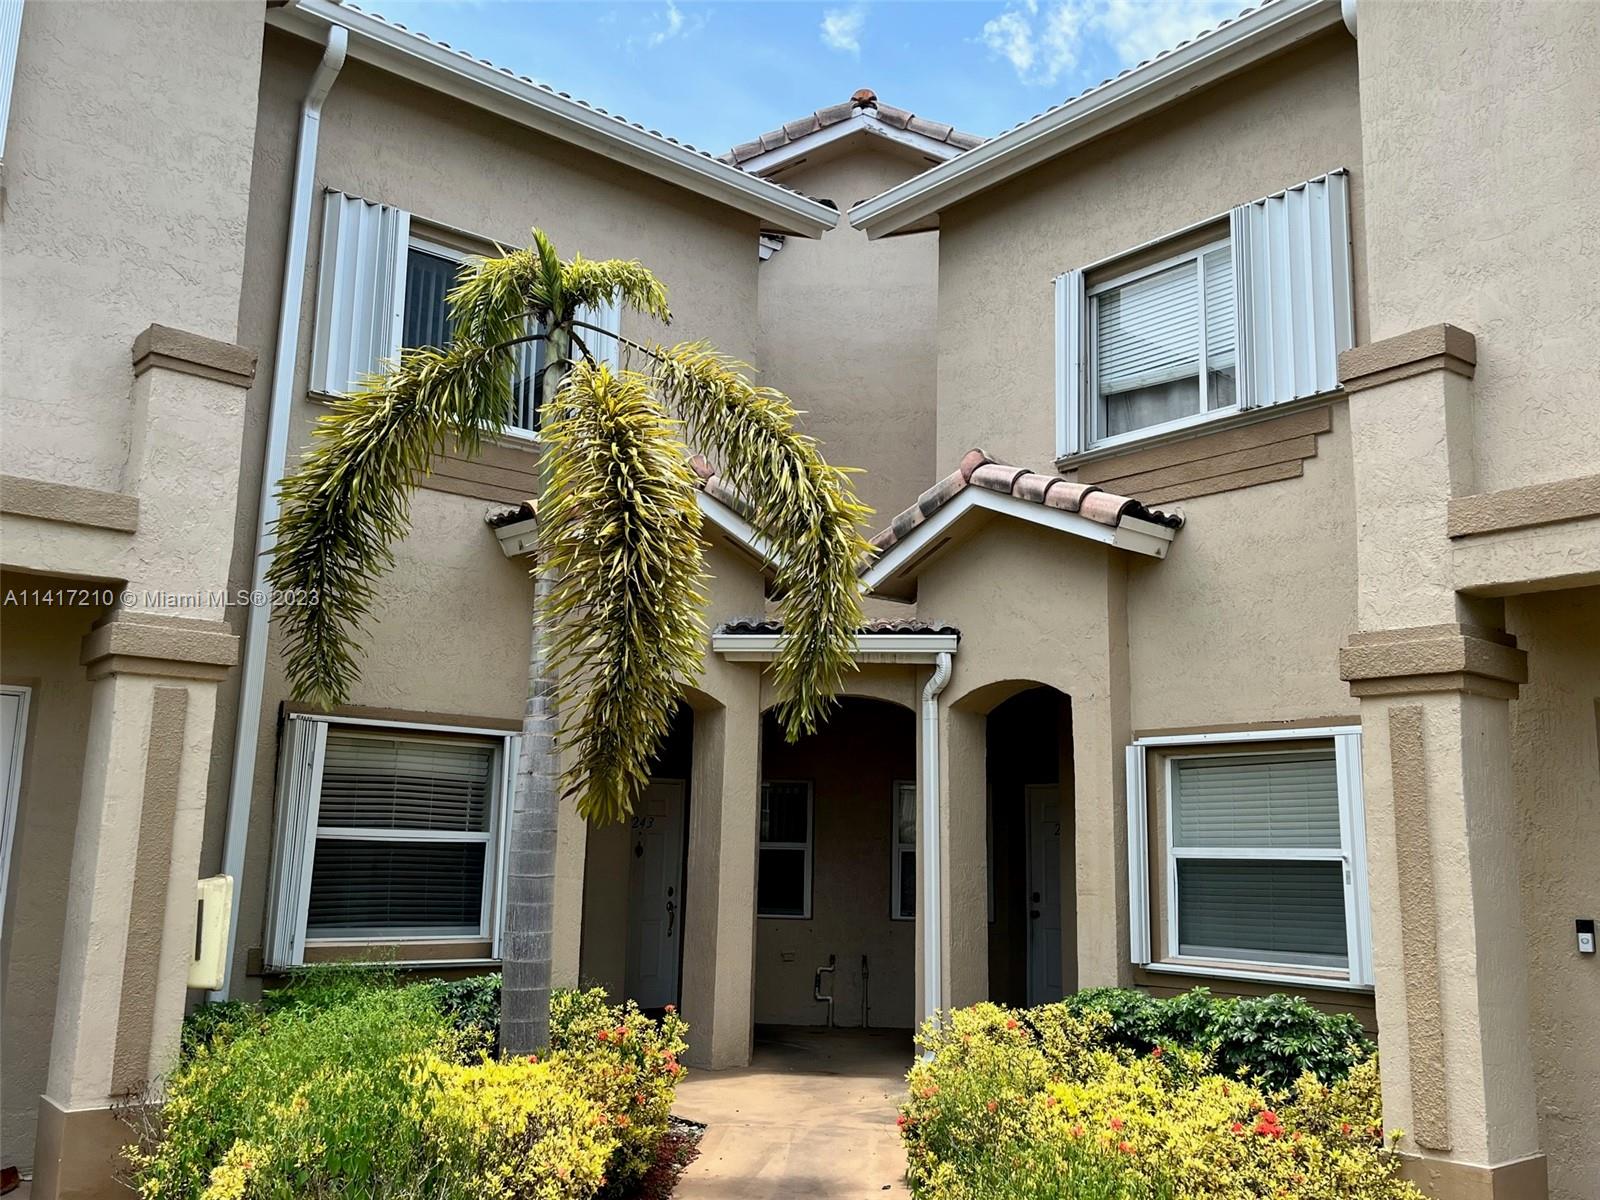 AFFORDABLE 2 BR/2.5 BA TOWN HOME IN THE WELL ESTABLISHED COMMUNITY OF TOWN GATE AT KEYS GATE. THIS HOME OFFERS A LARGE GREAT ROOM, BOTH BEDROOMS W/ OWN BATHROOMS, SMALL FENCED IN YARD. KITCHEN COUNTERTOPS BEING REDONE. HOA FEE INCLUDES SECURITY, ALARM, CABLE, INTERNET, PEST CONTROL, ROOF, BUILDING INSURANCE, LAWN & LANDSCAPE MAINTENANCE AND COMMUNITY POOL